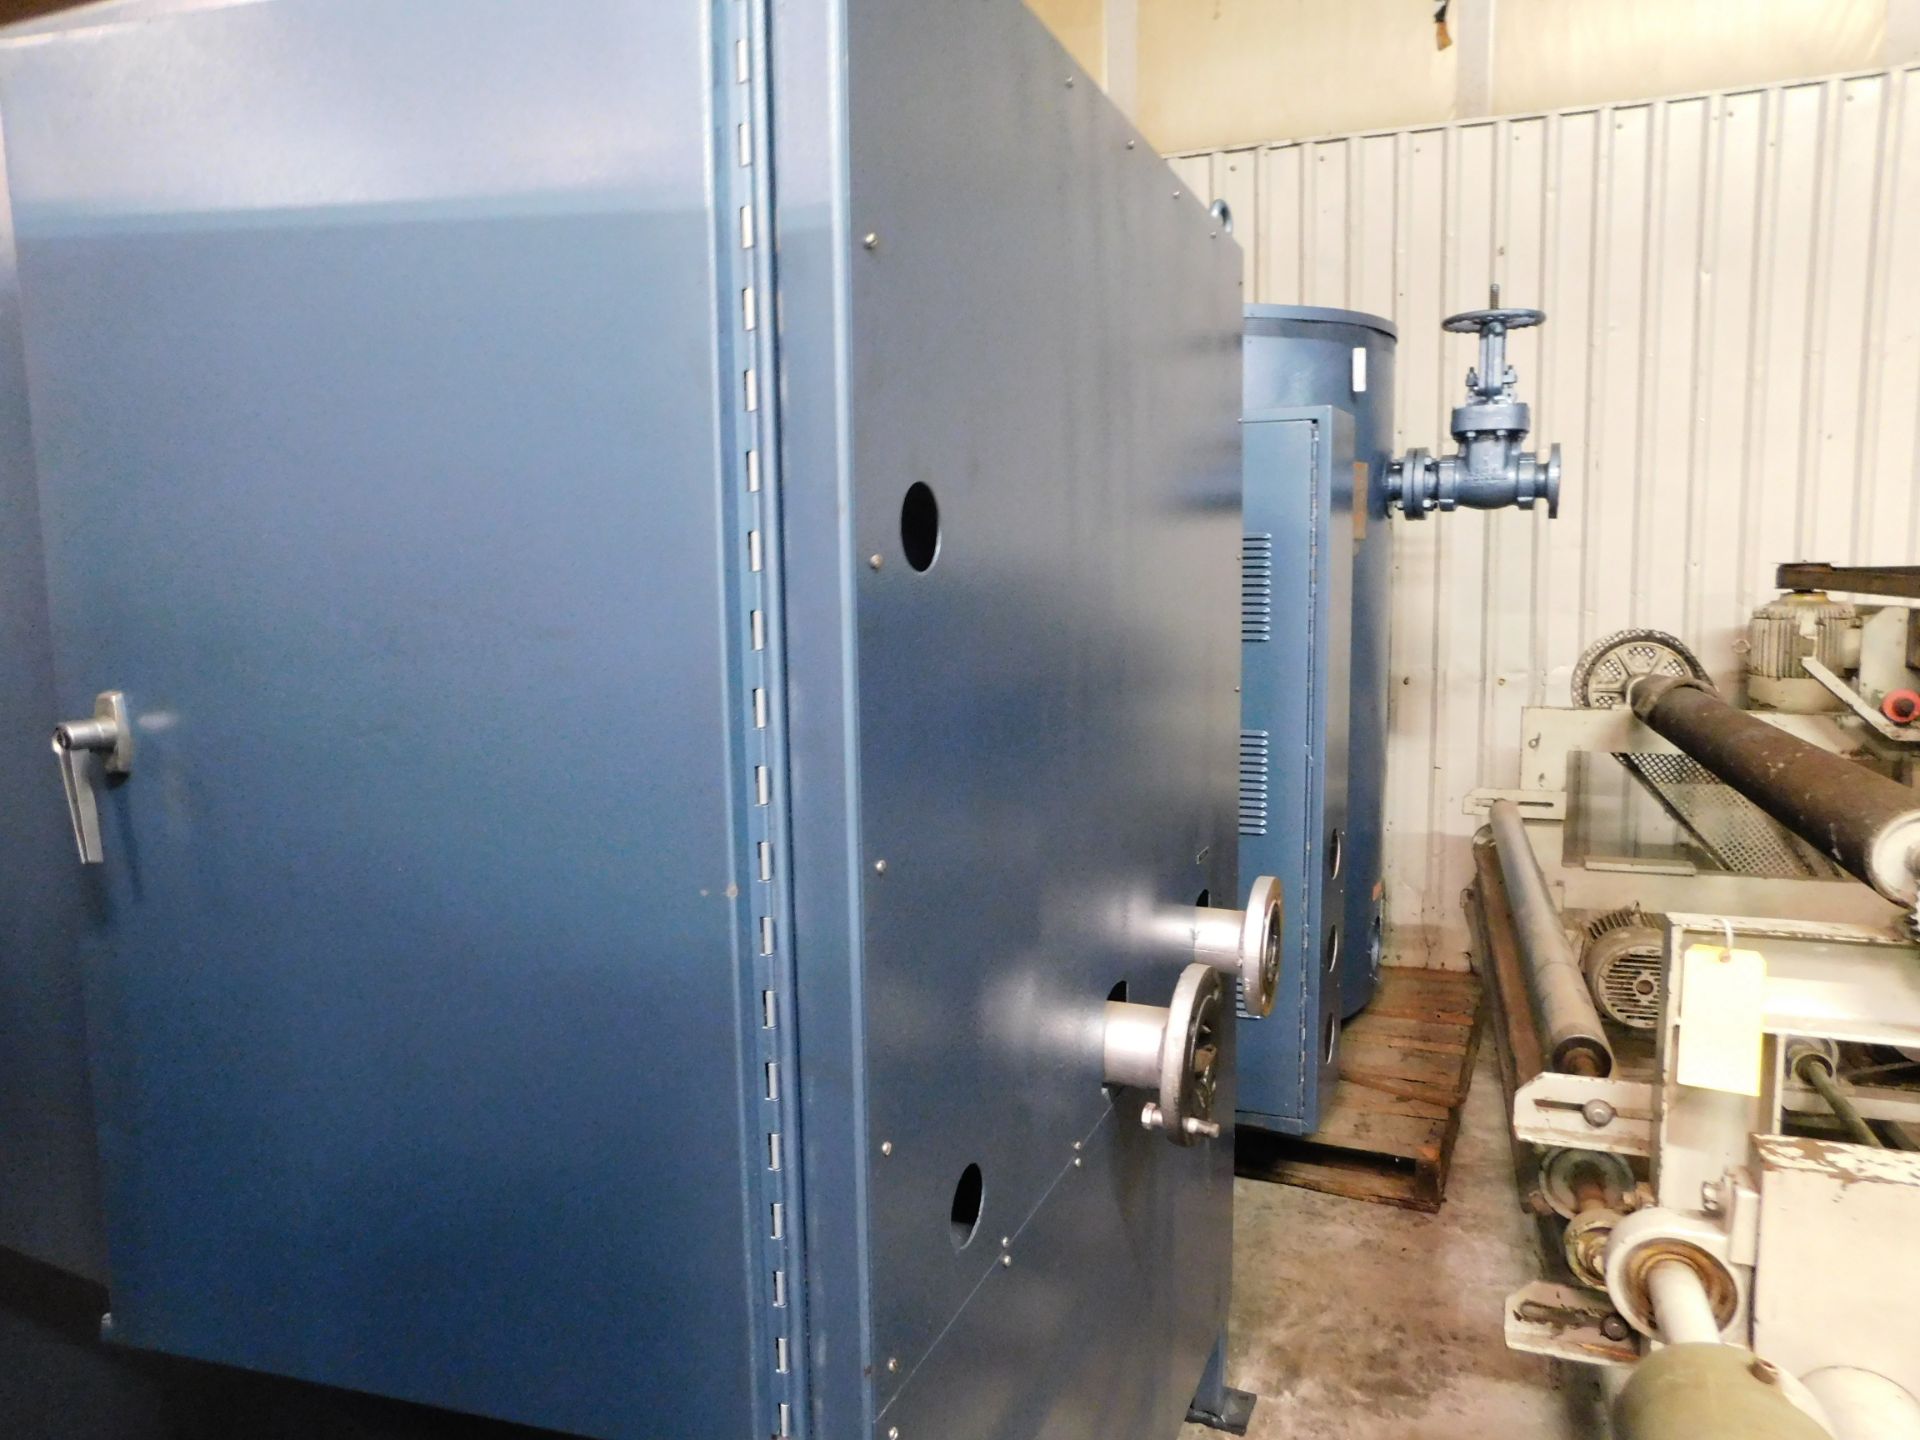 Gessner Boiler, HT-120-1, 460 Volts, 60 Hz, 3 Phase, 171 Amps, Working Condition, Rigging Fee $35 - Image 2 of 5